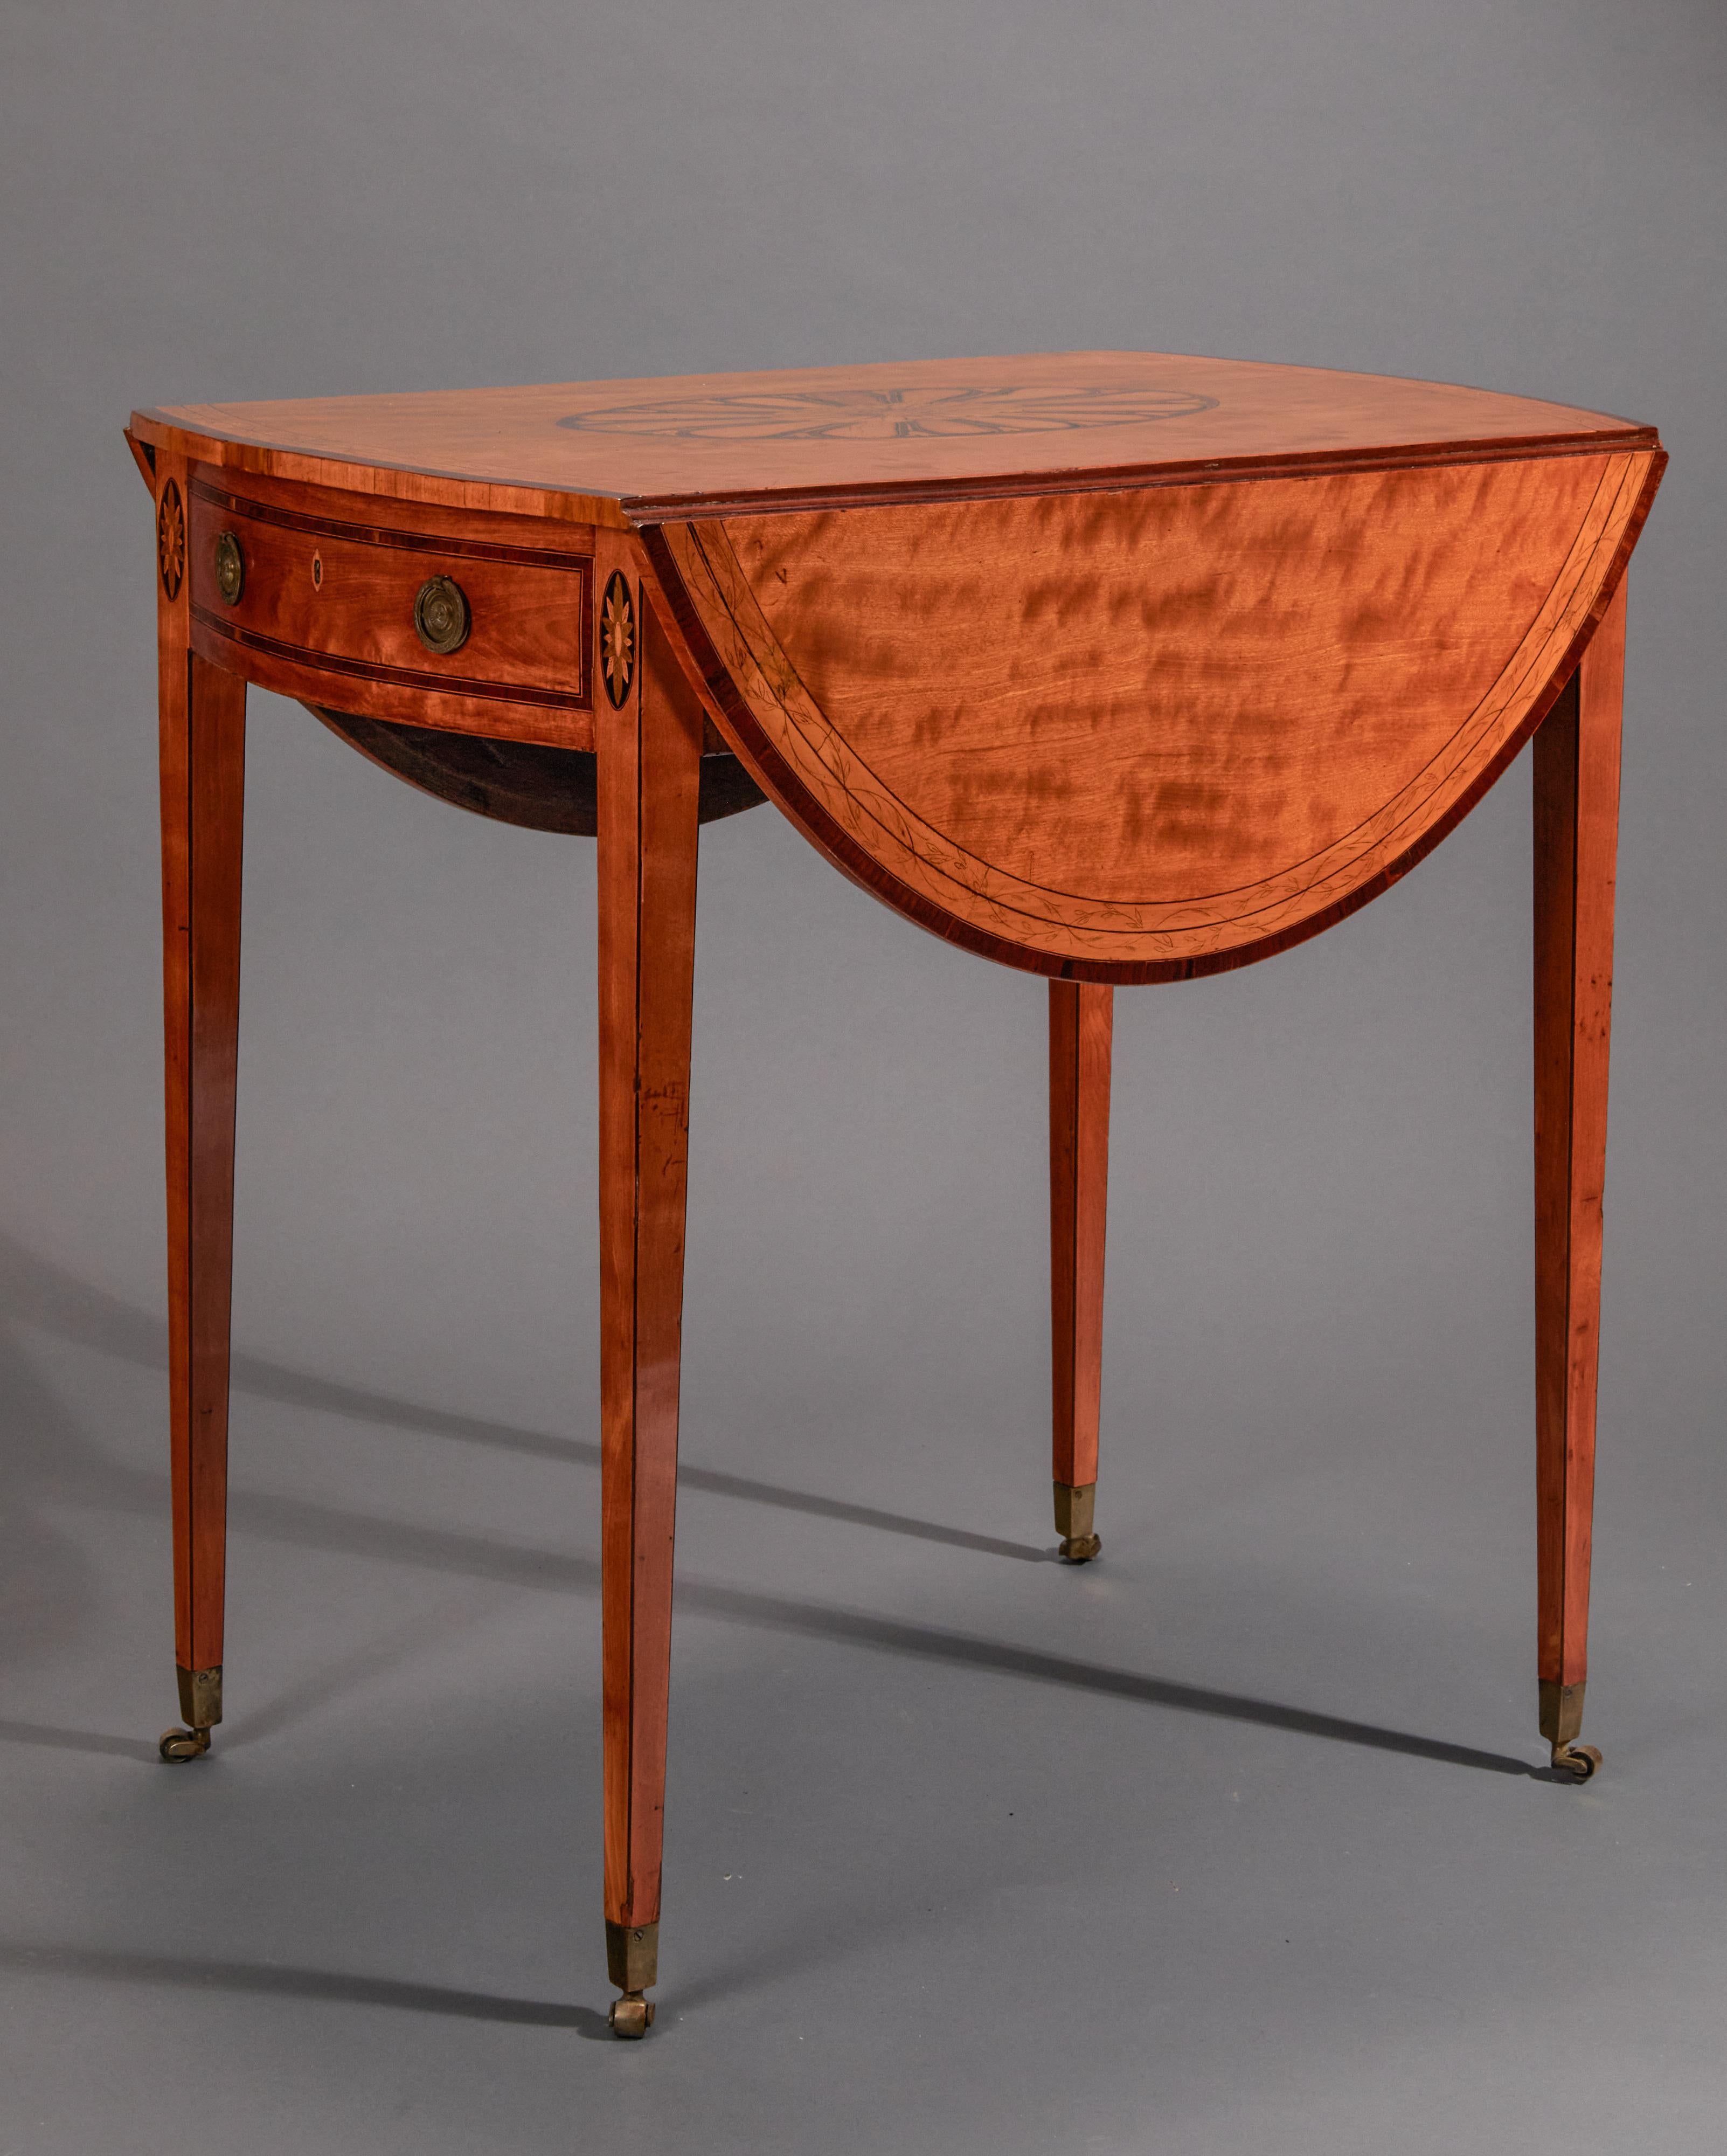 The satinwood top with two drop leaves, the edges vaneered in mahogany edging with line and leaf inlay. The central part of the top inlaid with medallion and conch shell. The whole raised on square tapering legs with original brass box casters.